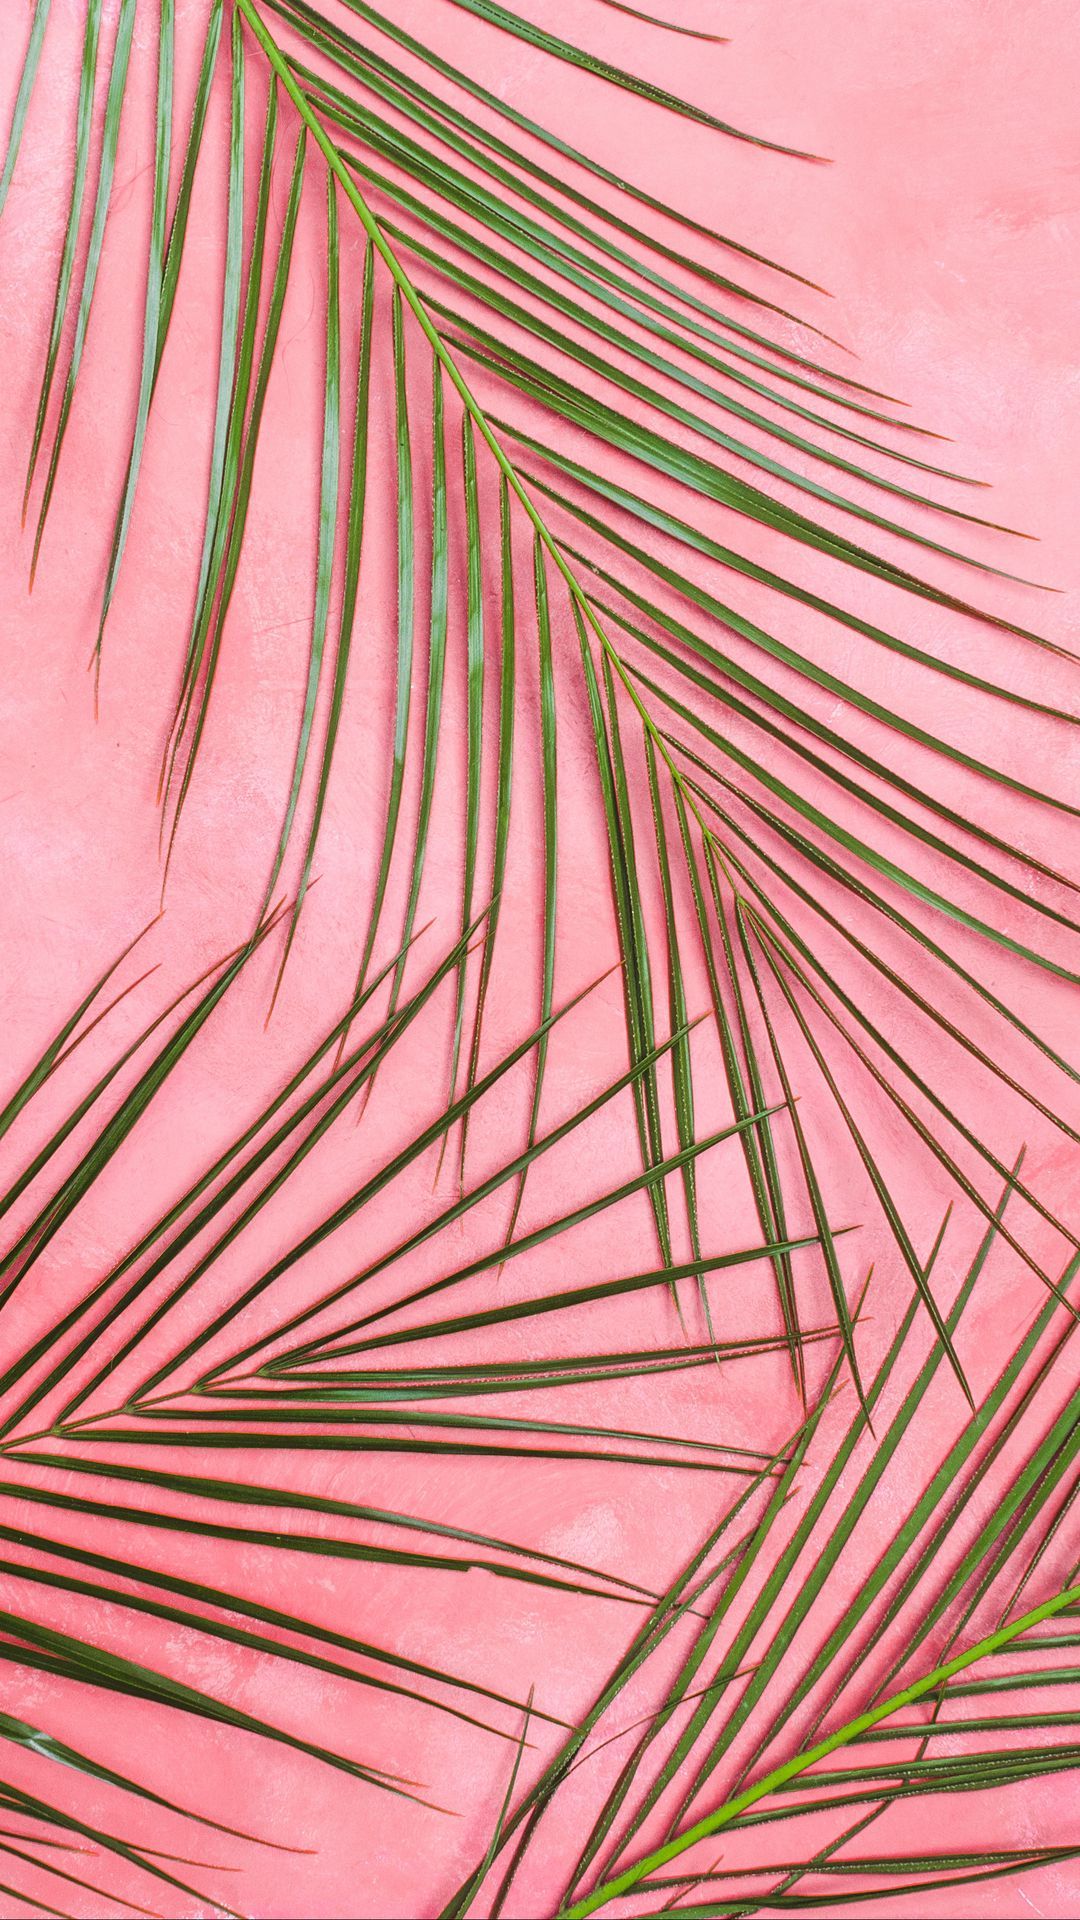 Download wallpaper 1080x1920 palm tree, branches, pastel, leaves, minimalism samsung galaxy s s note, sony xperia z, z z z htc one, lenovo vibe HD background